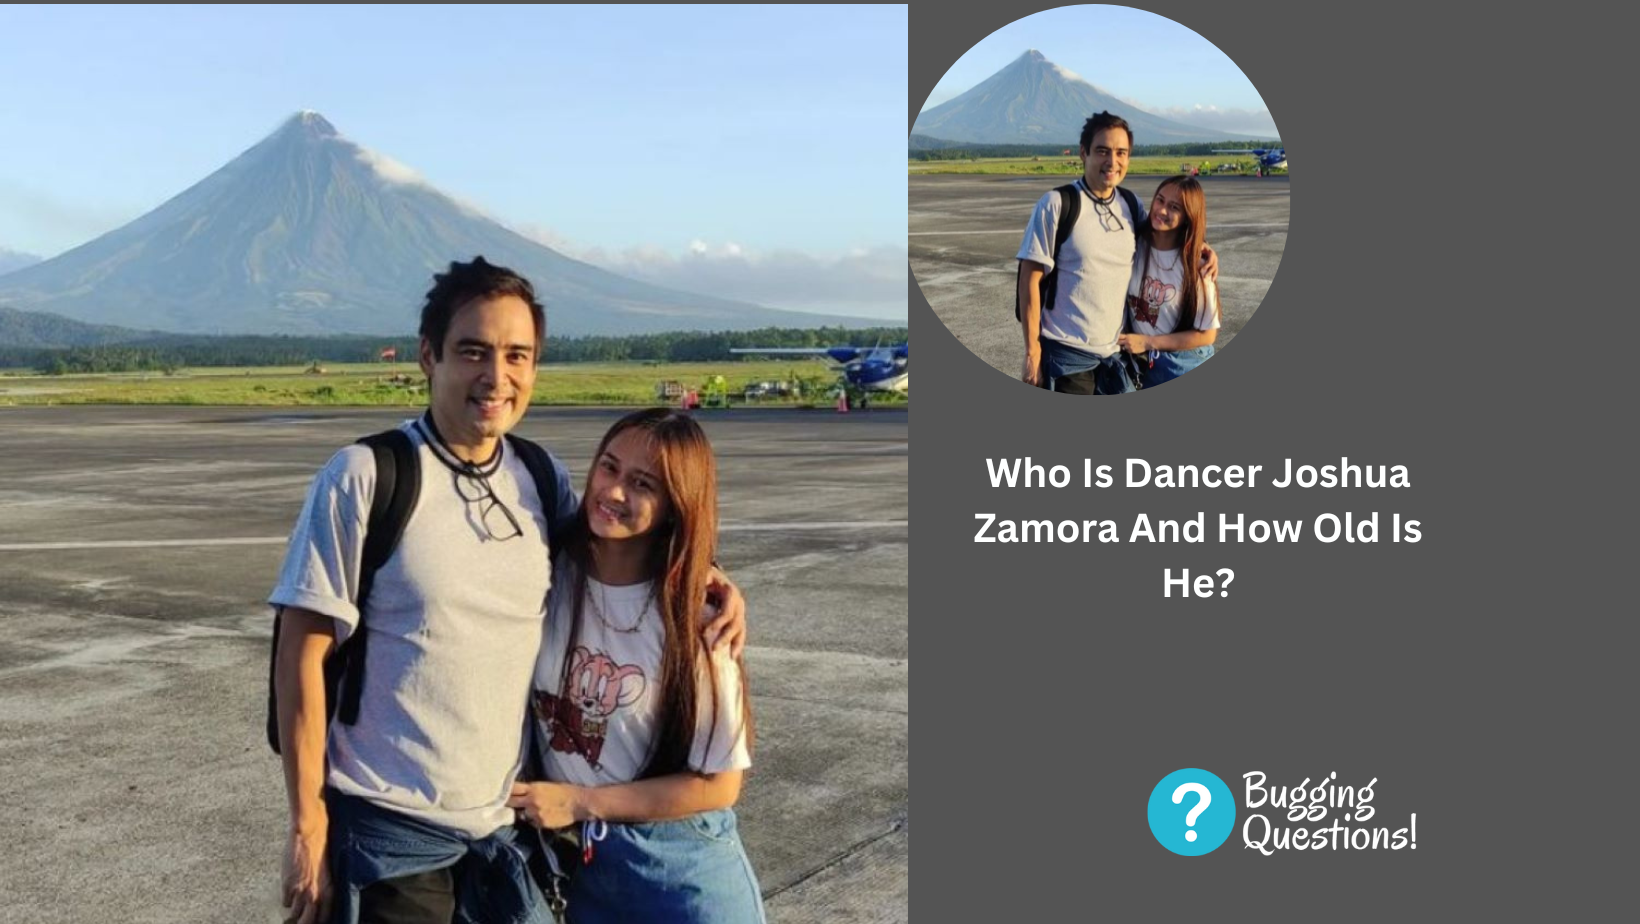 Who Is Dancer Joshua Zamora And How Old Is He?